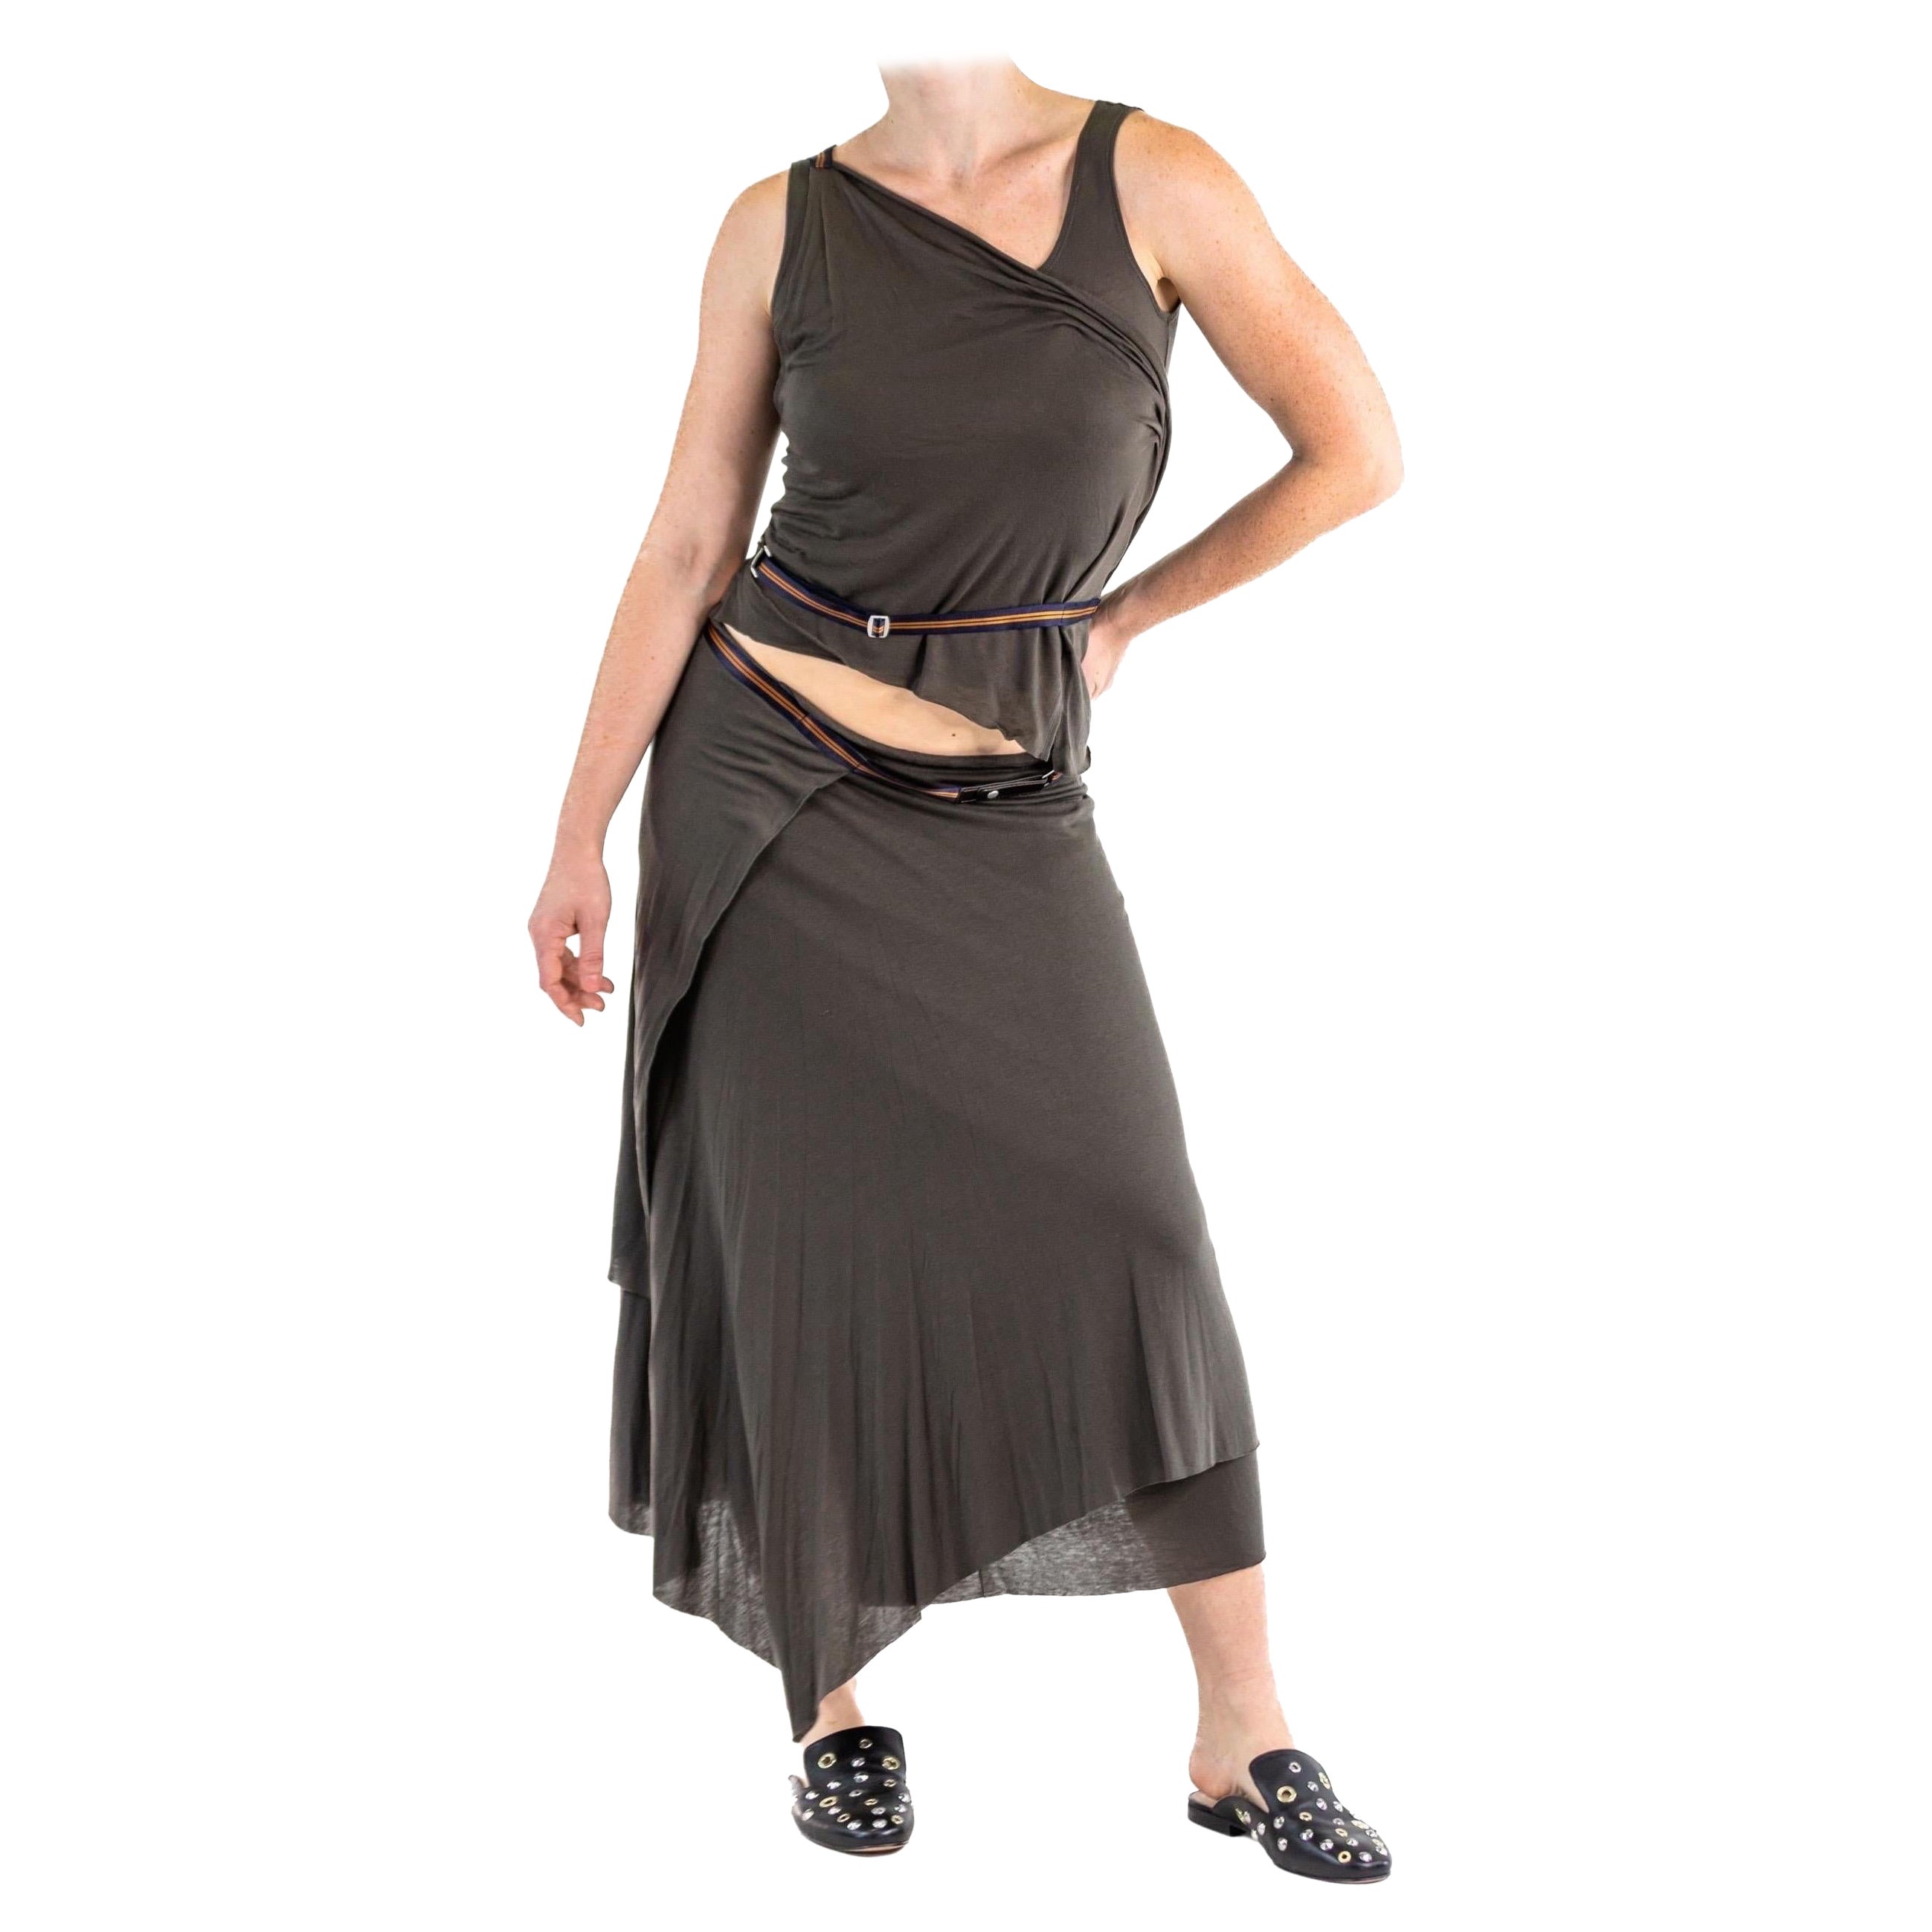 2000S ISSEY MIYAKE Olive Green Cotton Blend Jersey Top And Skirt Ensemble With  For Sale